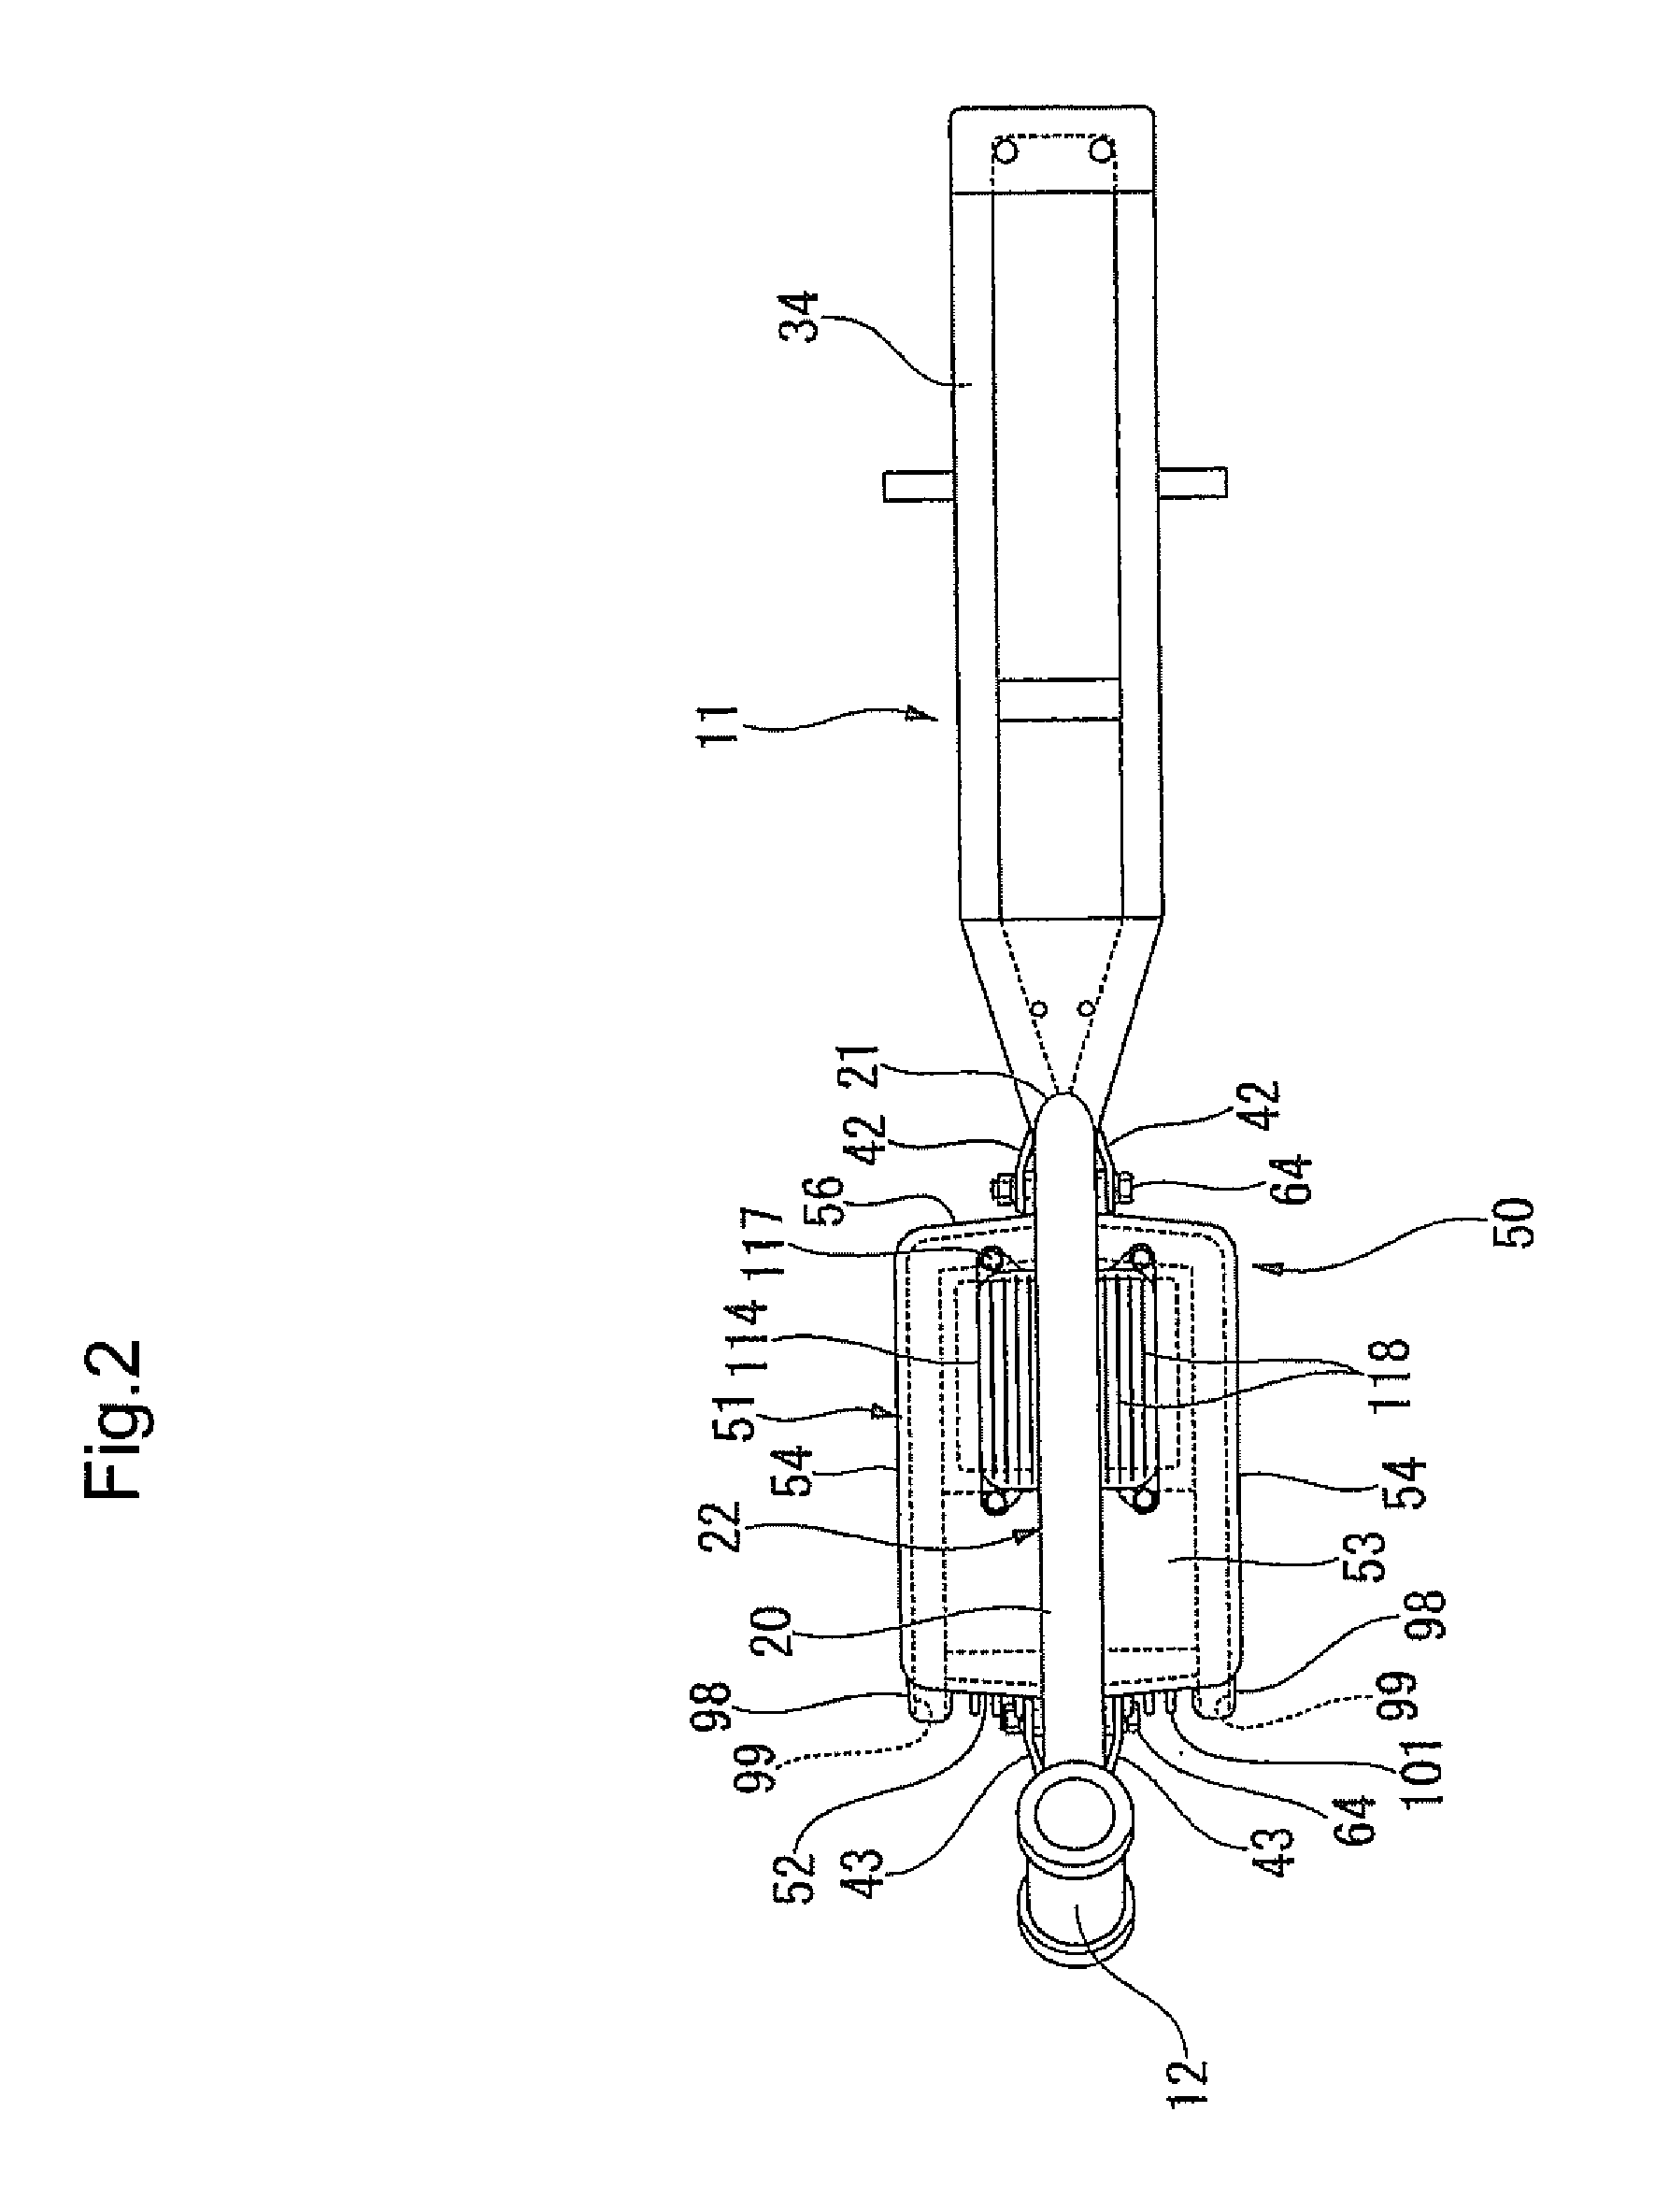 Drive assembly for an electric motorcycle, and electric motorcycle incorporating same